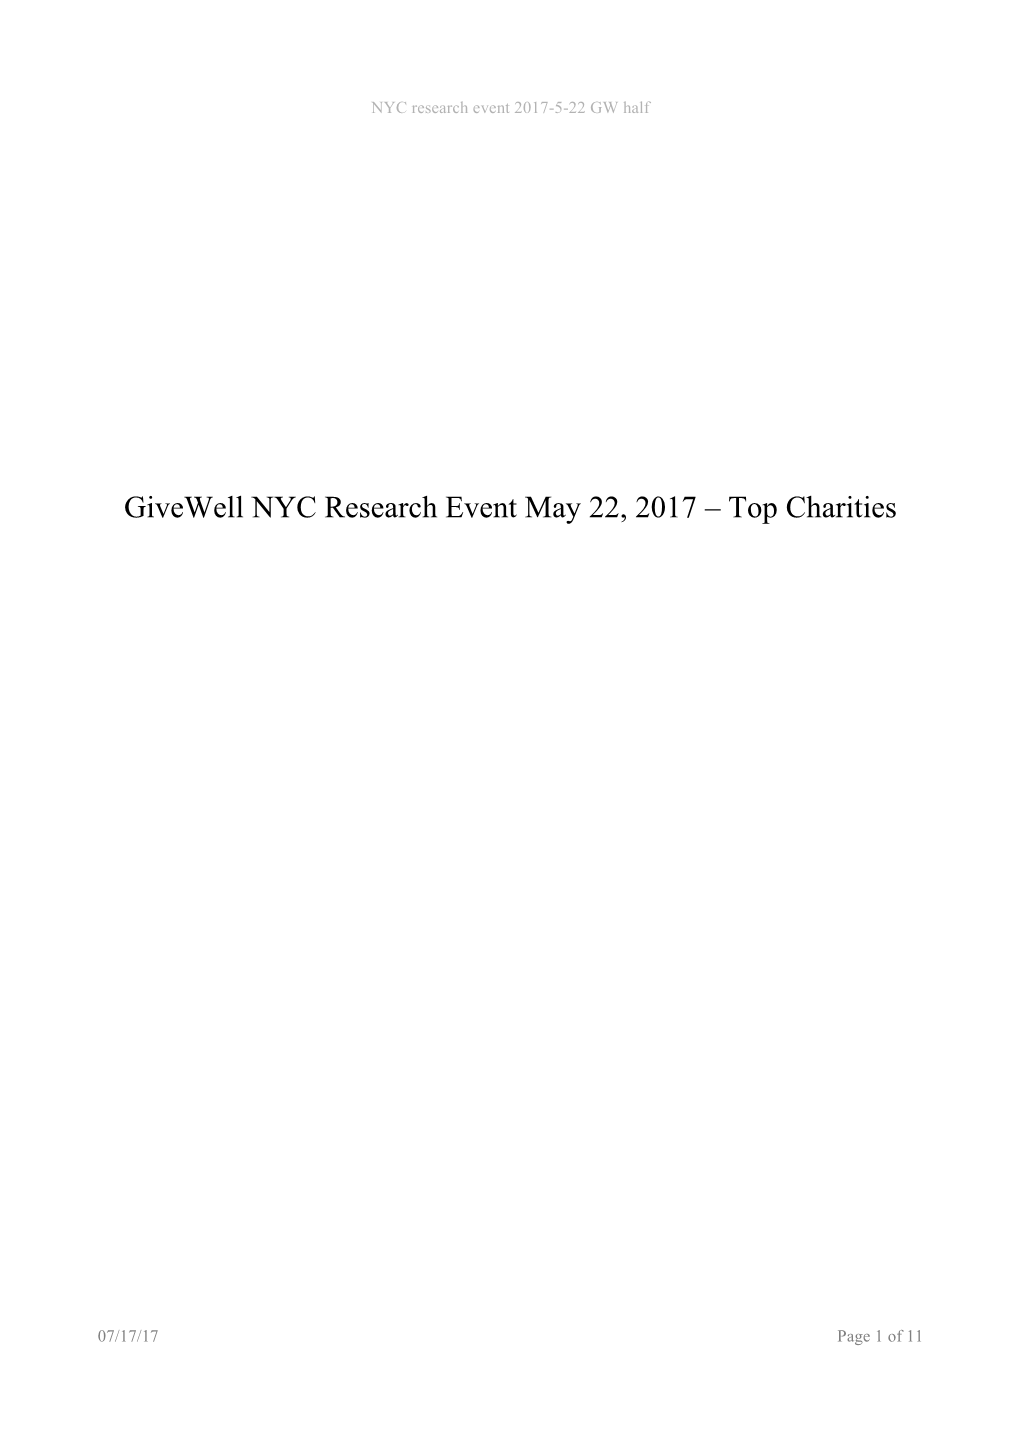 Givewell NYC Research Event May 22, 2017 – Top Charities